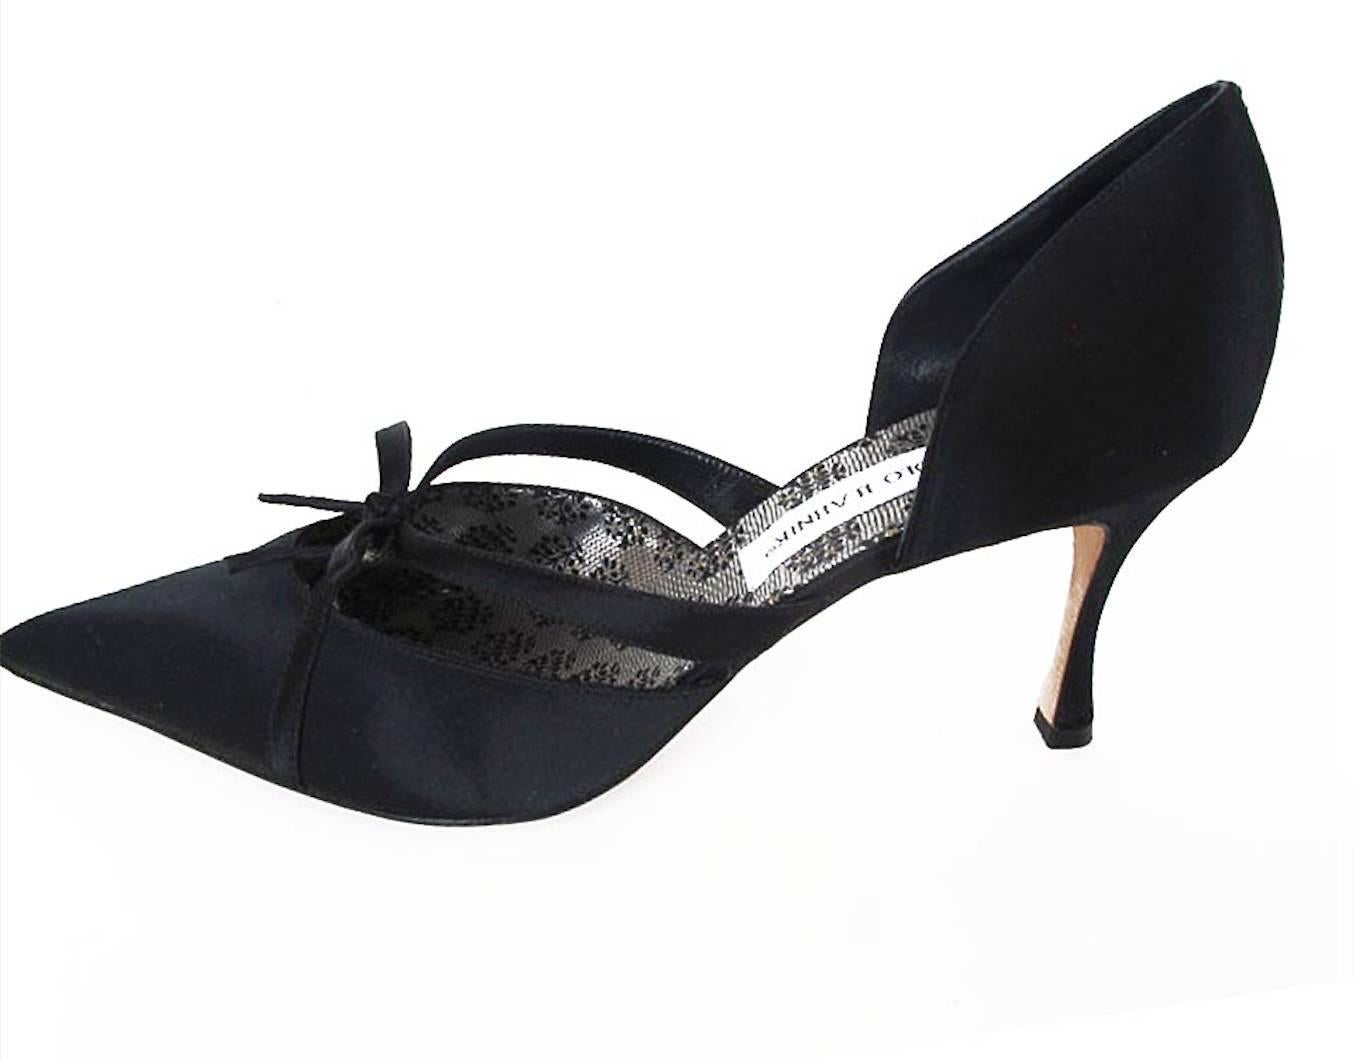 These 1950's inspired black satin Manolo Blahnik evening shoes have a fabulous pointy toe and lovely bow detail on front. The thin heel is 3 inches high. The shoes are new/never worn.

*Your Purchase Benefits Those Who Are Developmentally Disabled.